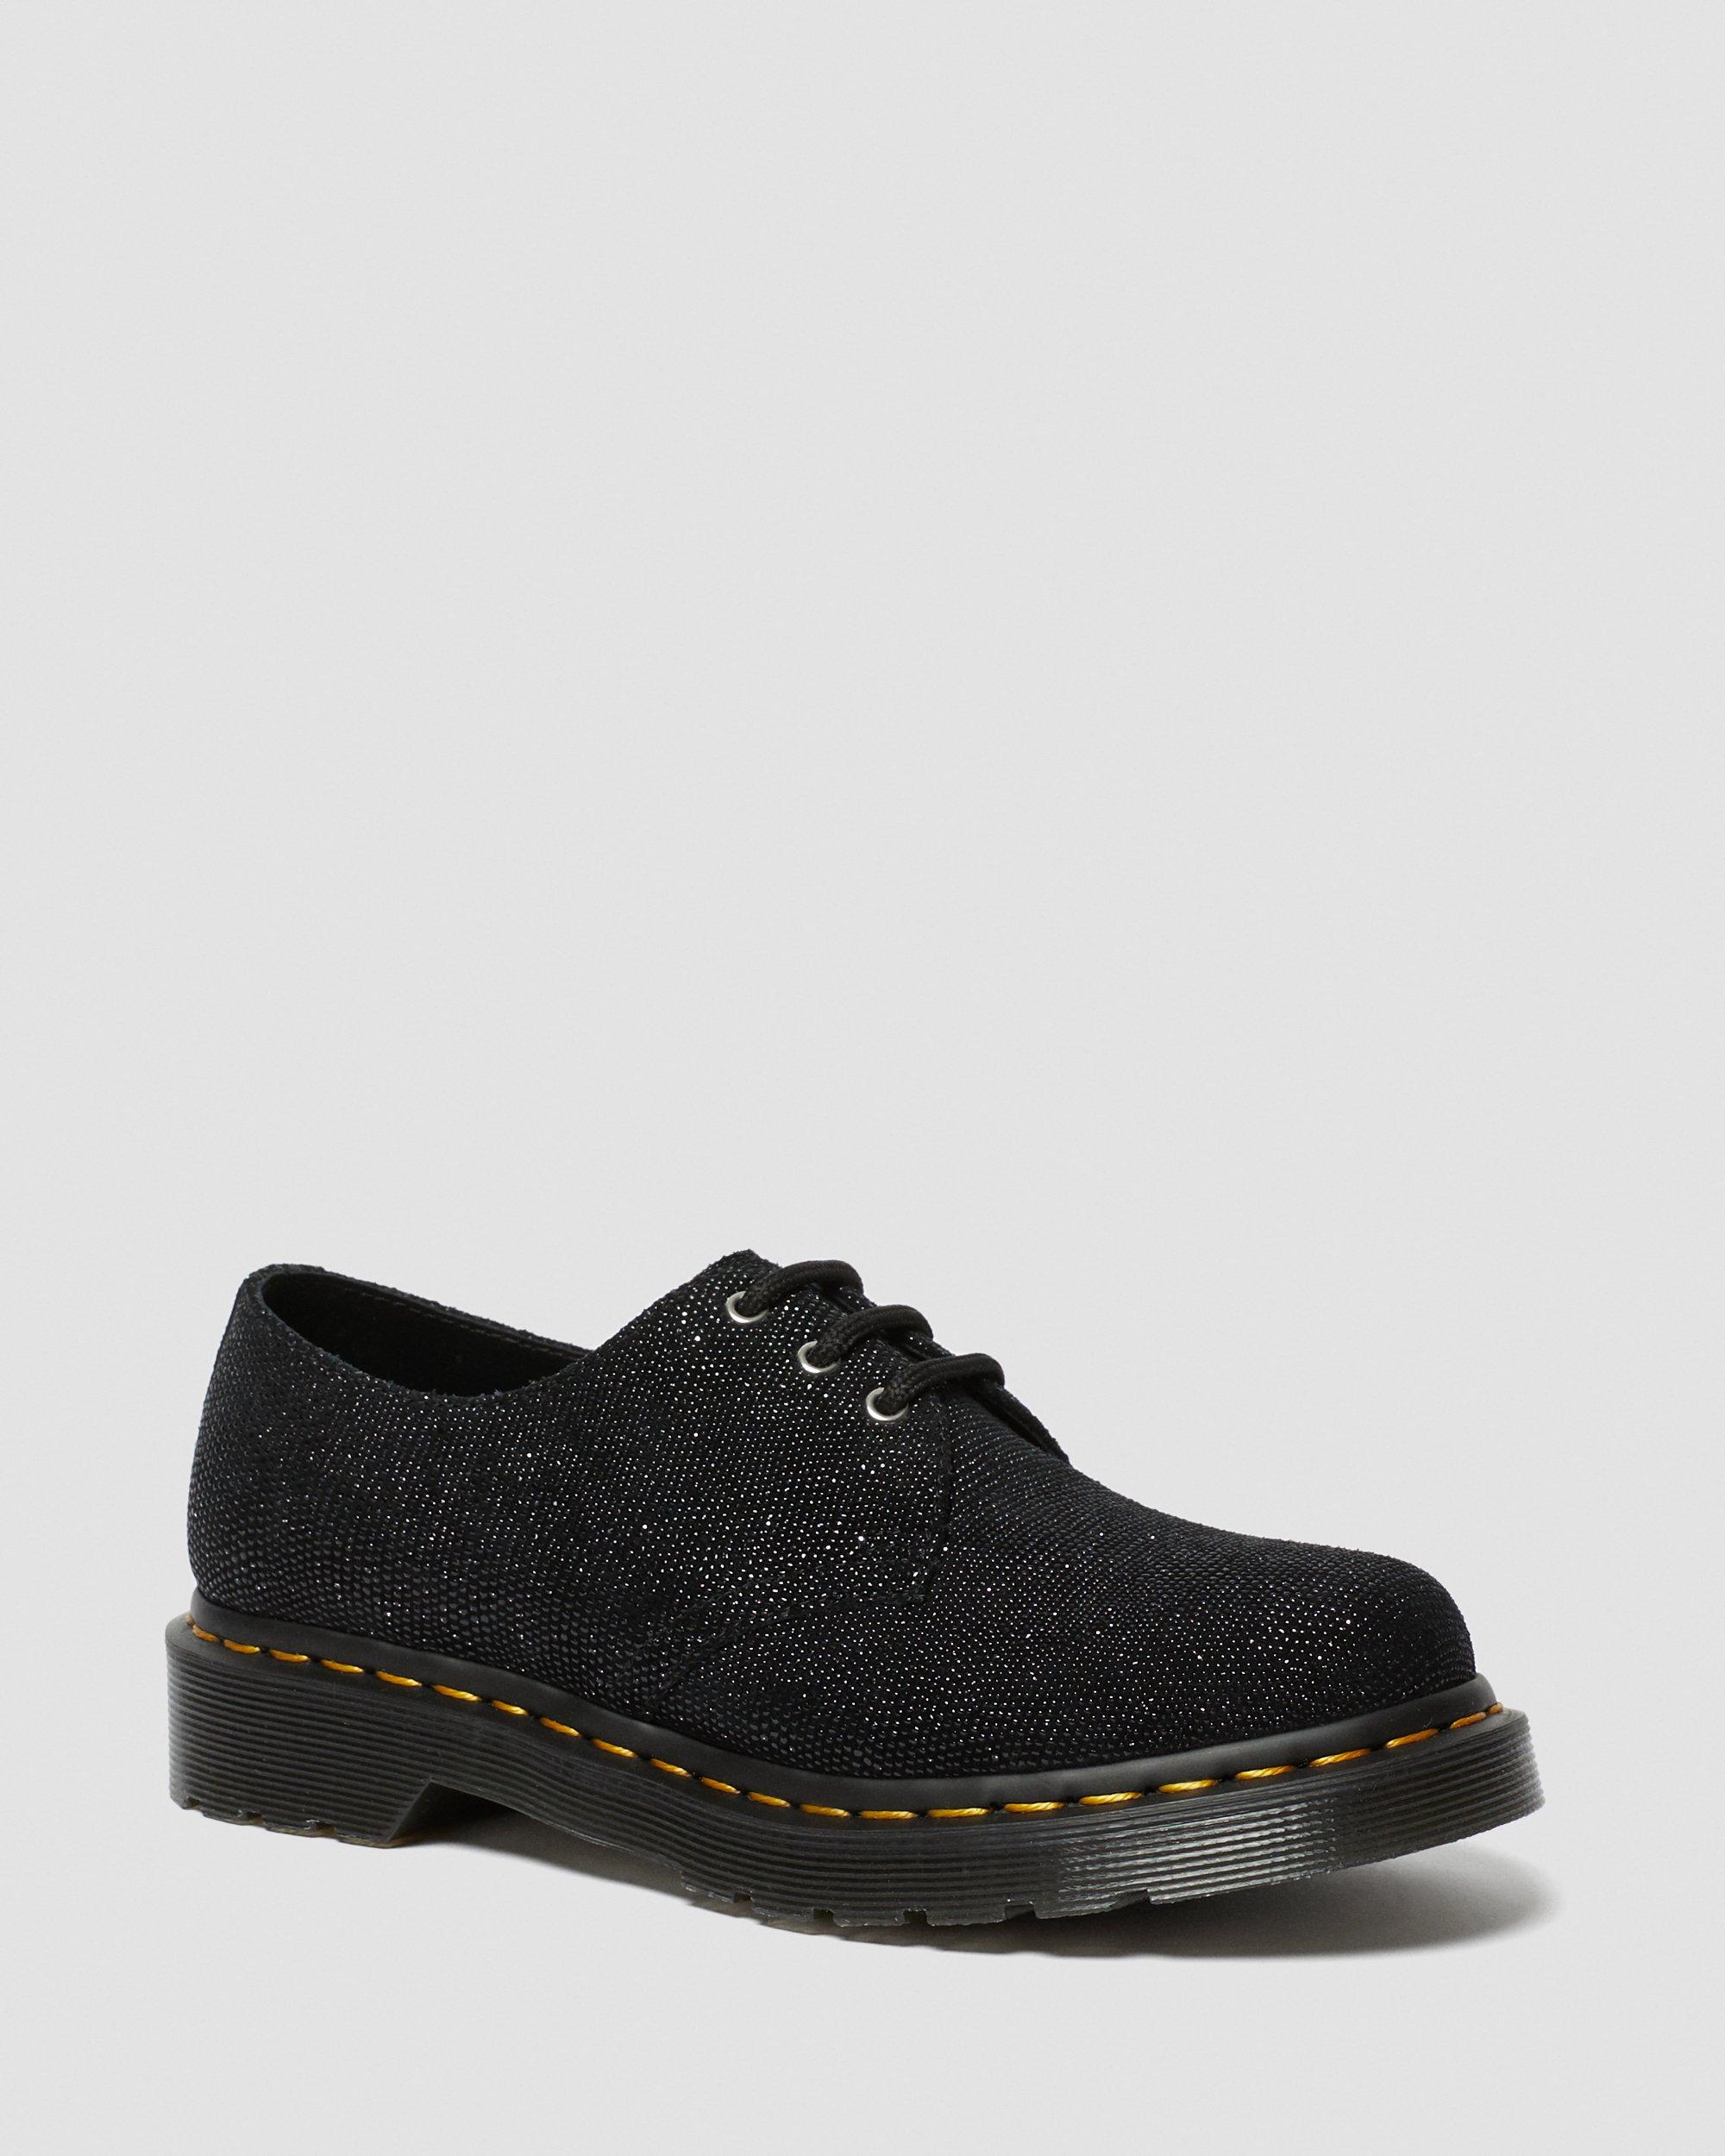 GLITTER OXFORD SHOES | Dr. Martens Official